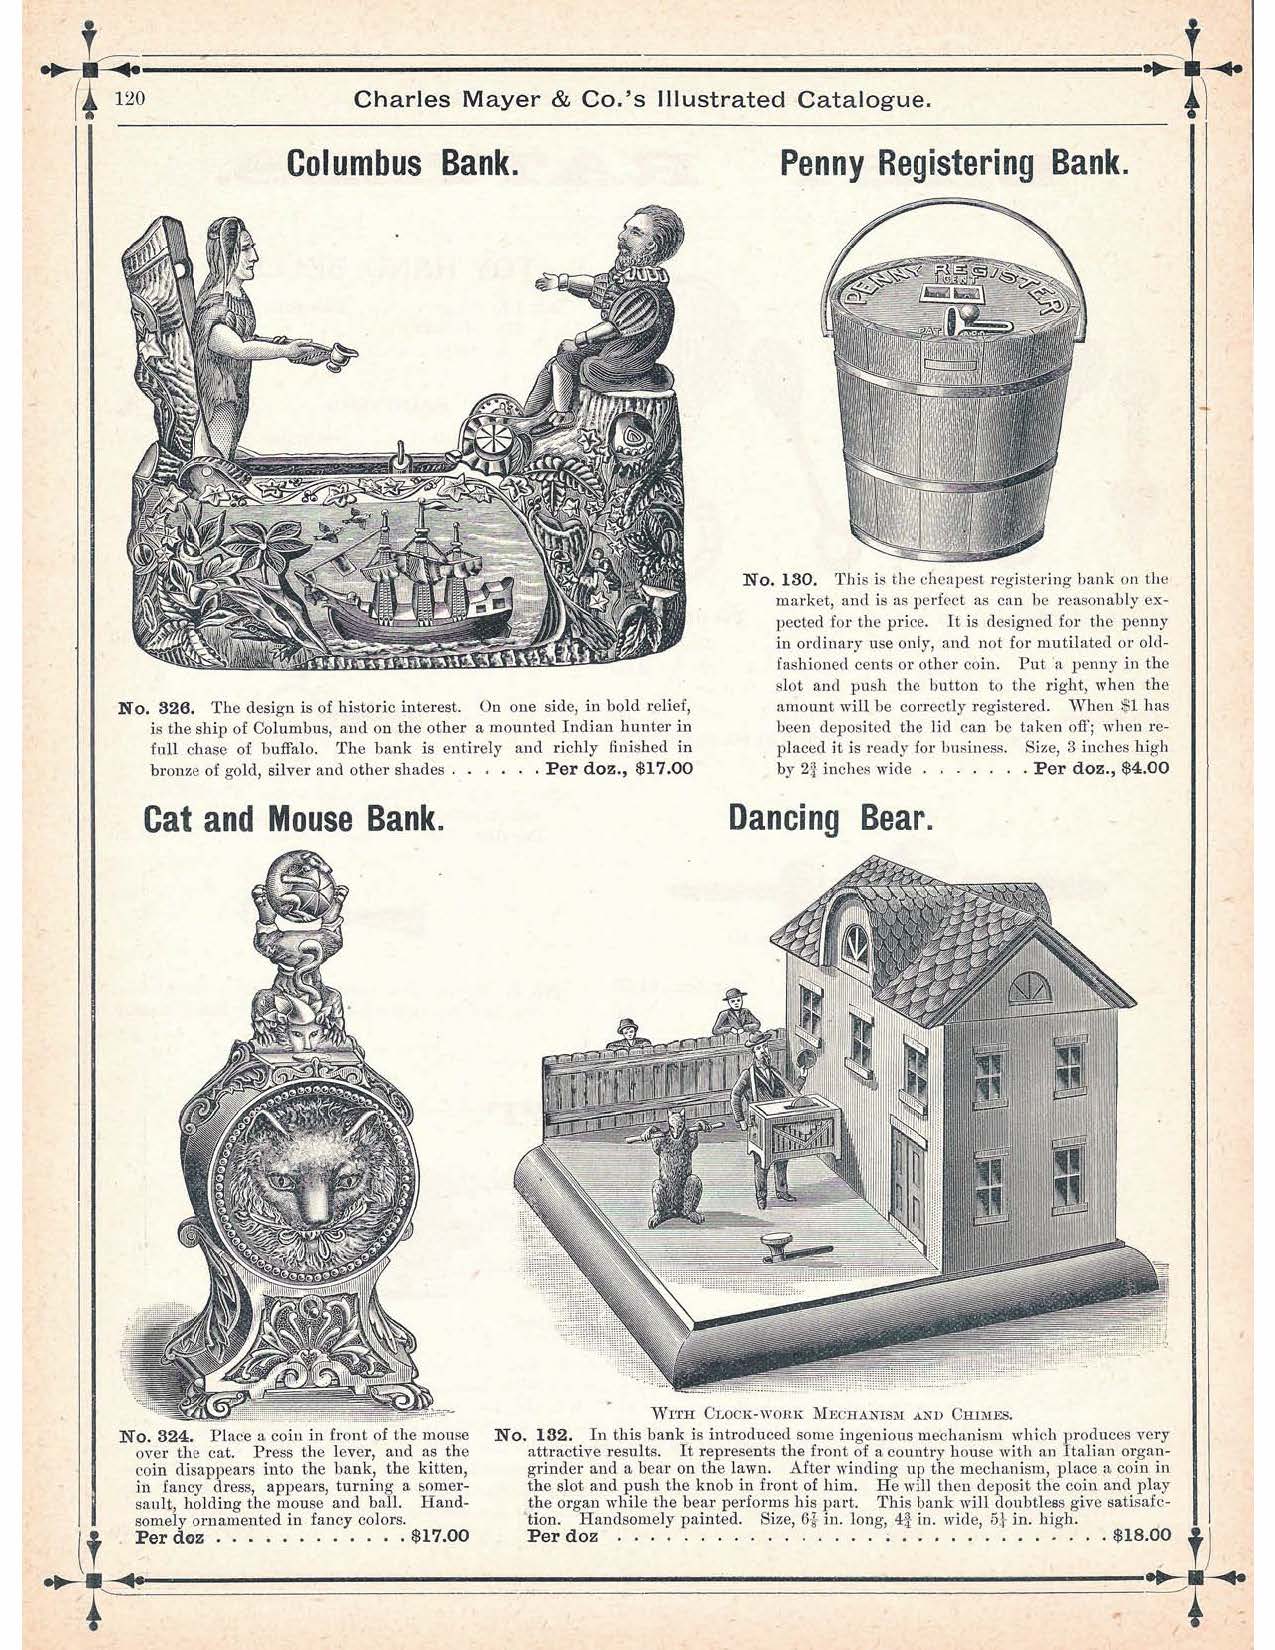 The Jim Rocheleau Collection of Still and Mechanical Banks Catalogue RSL 